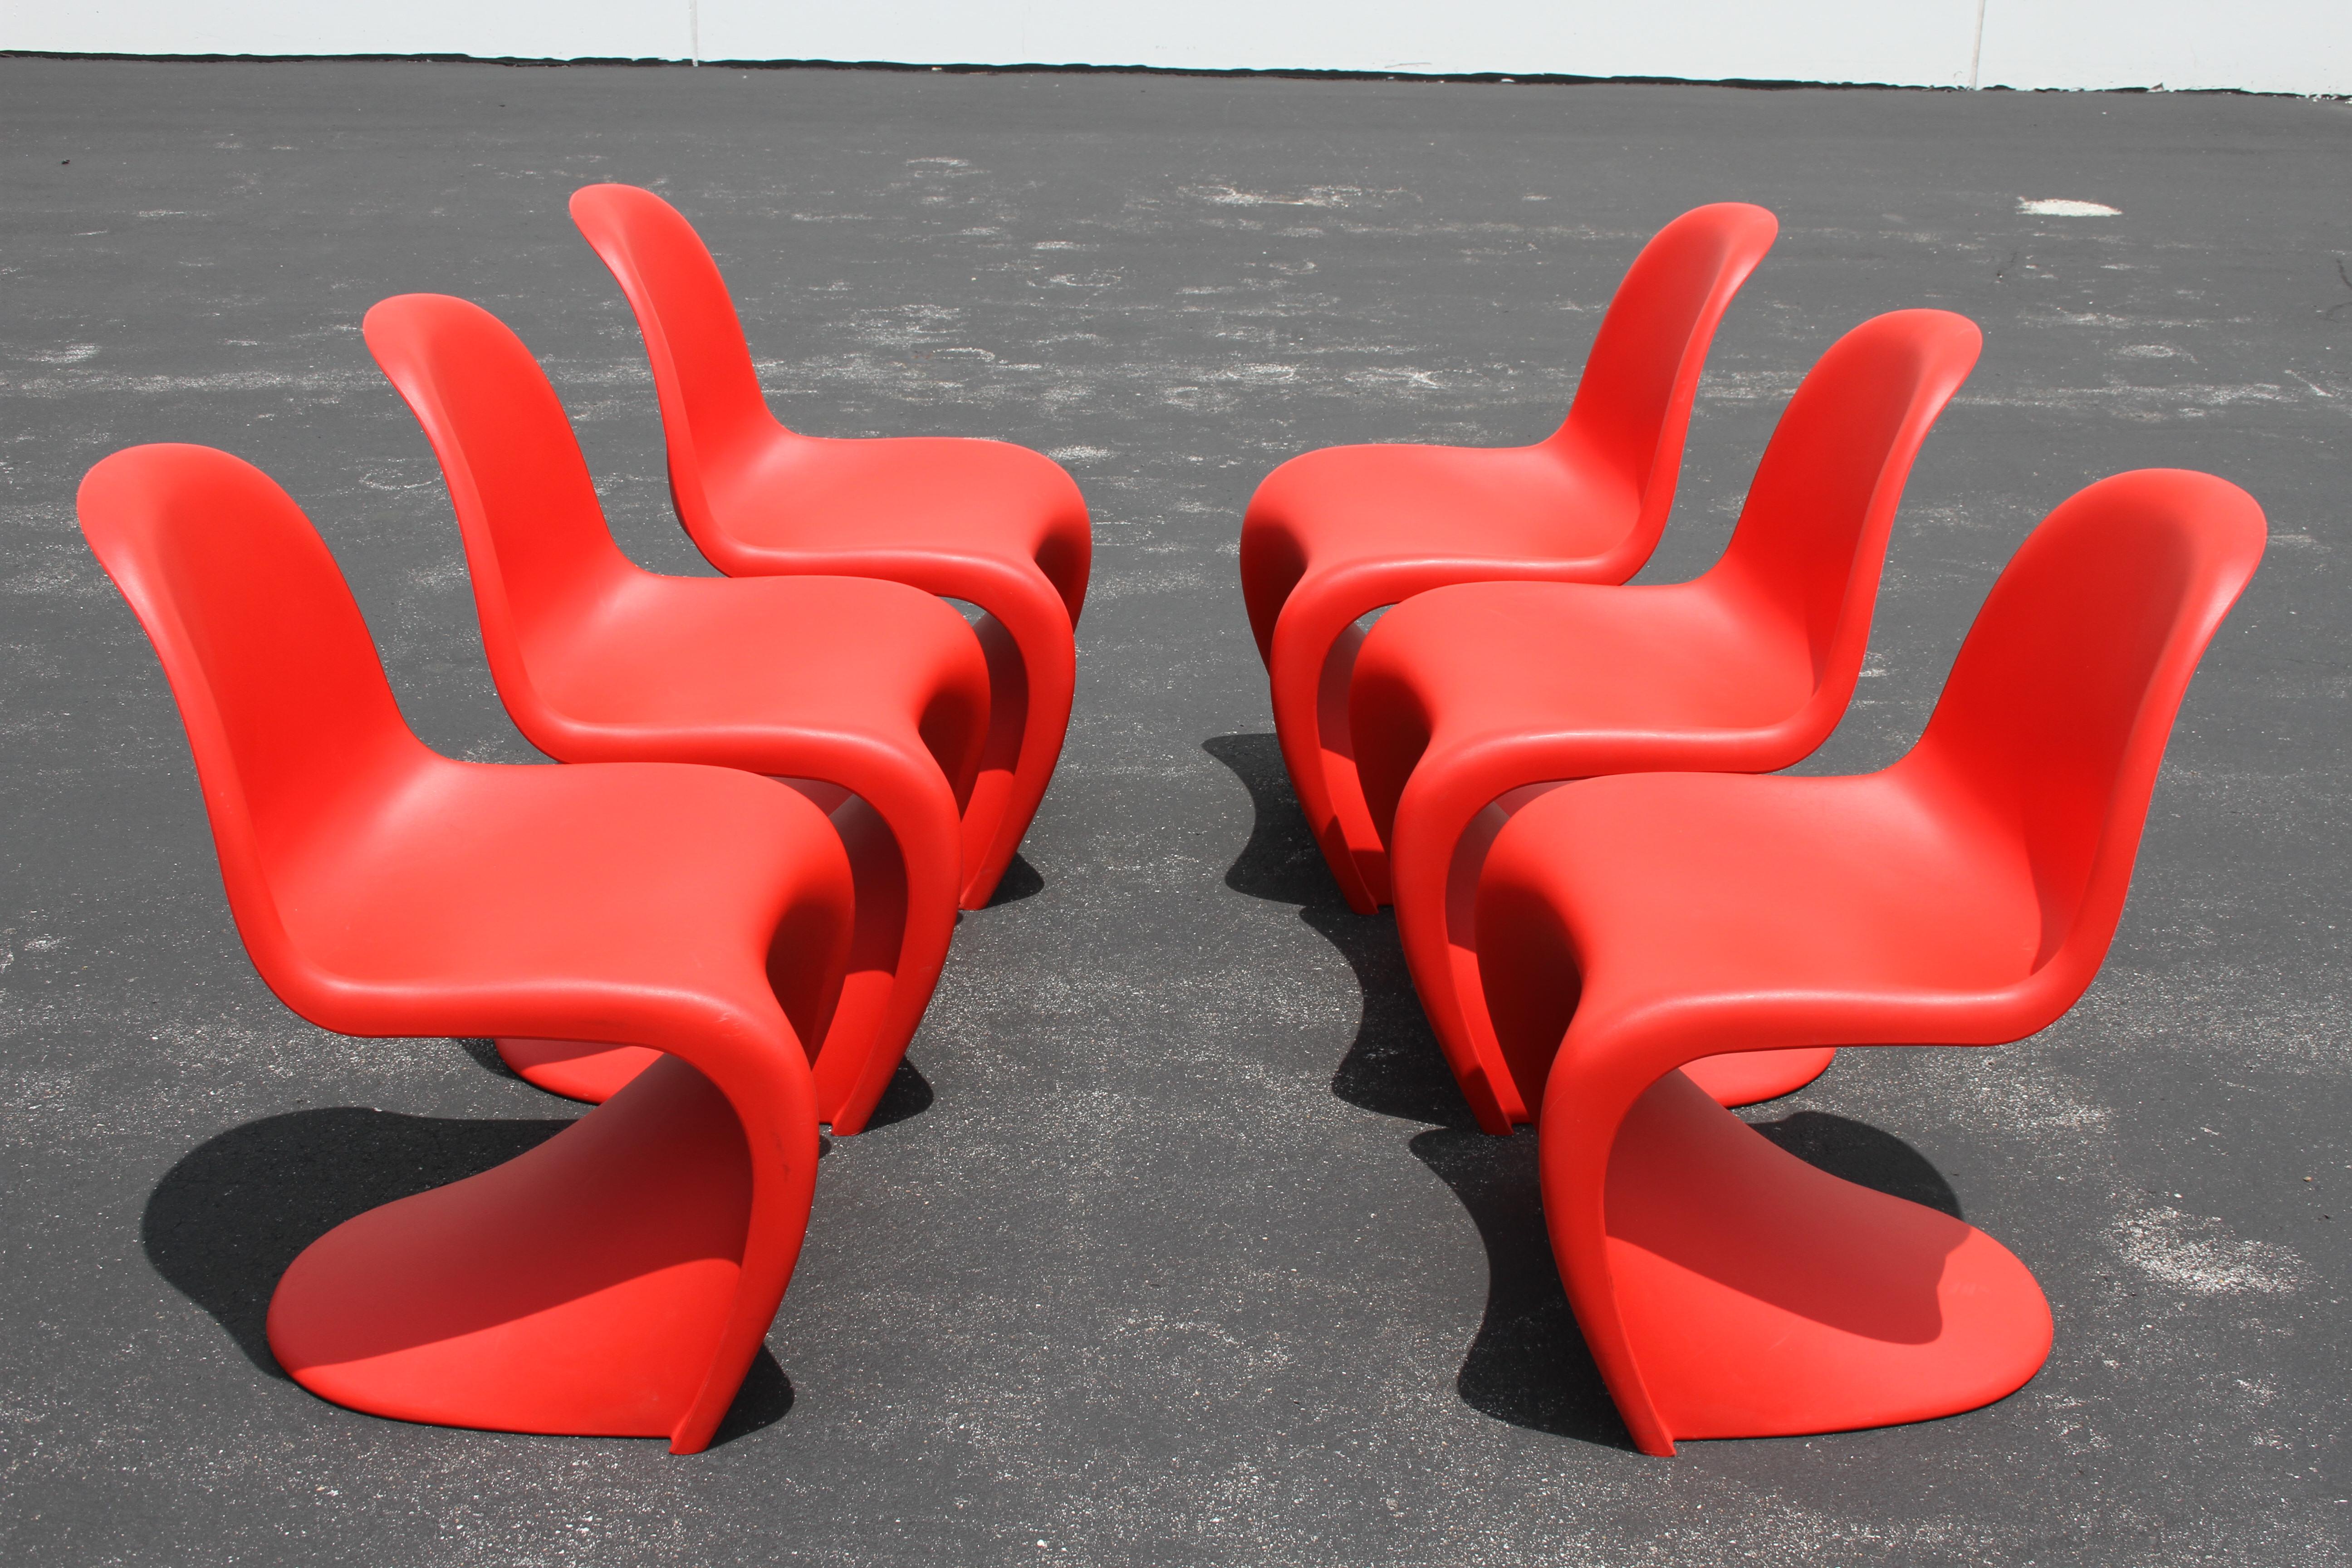 Classic Mid-Century Modern Verner Panton Chair in Red, Vitra Production 5